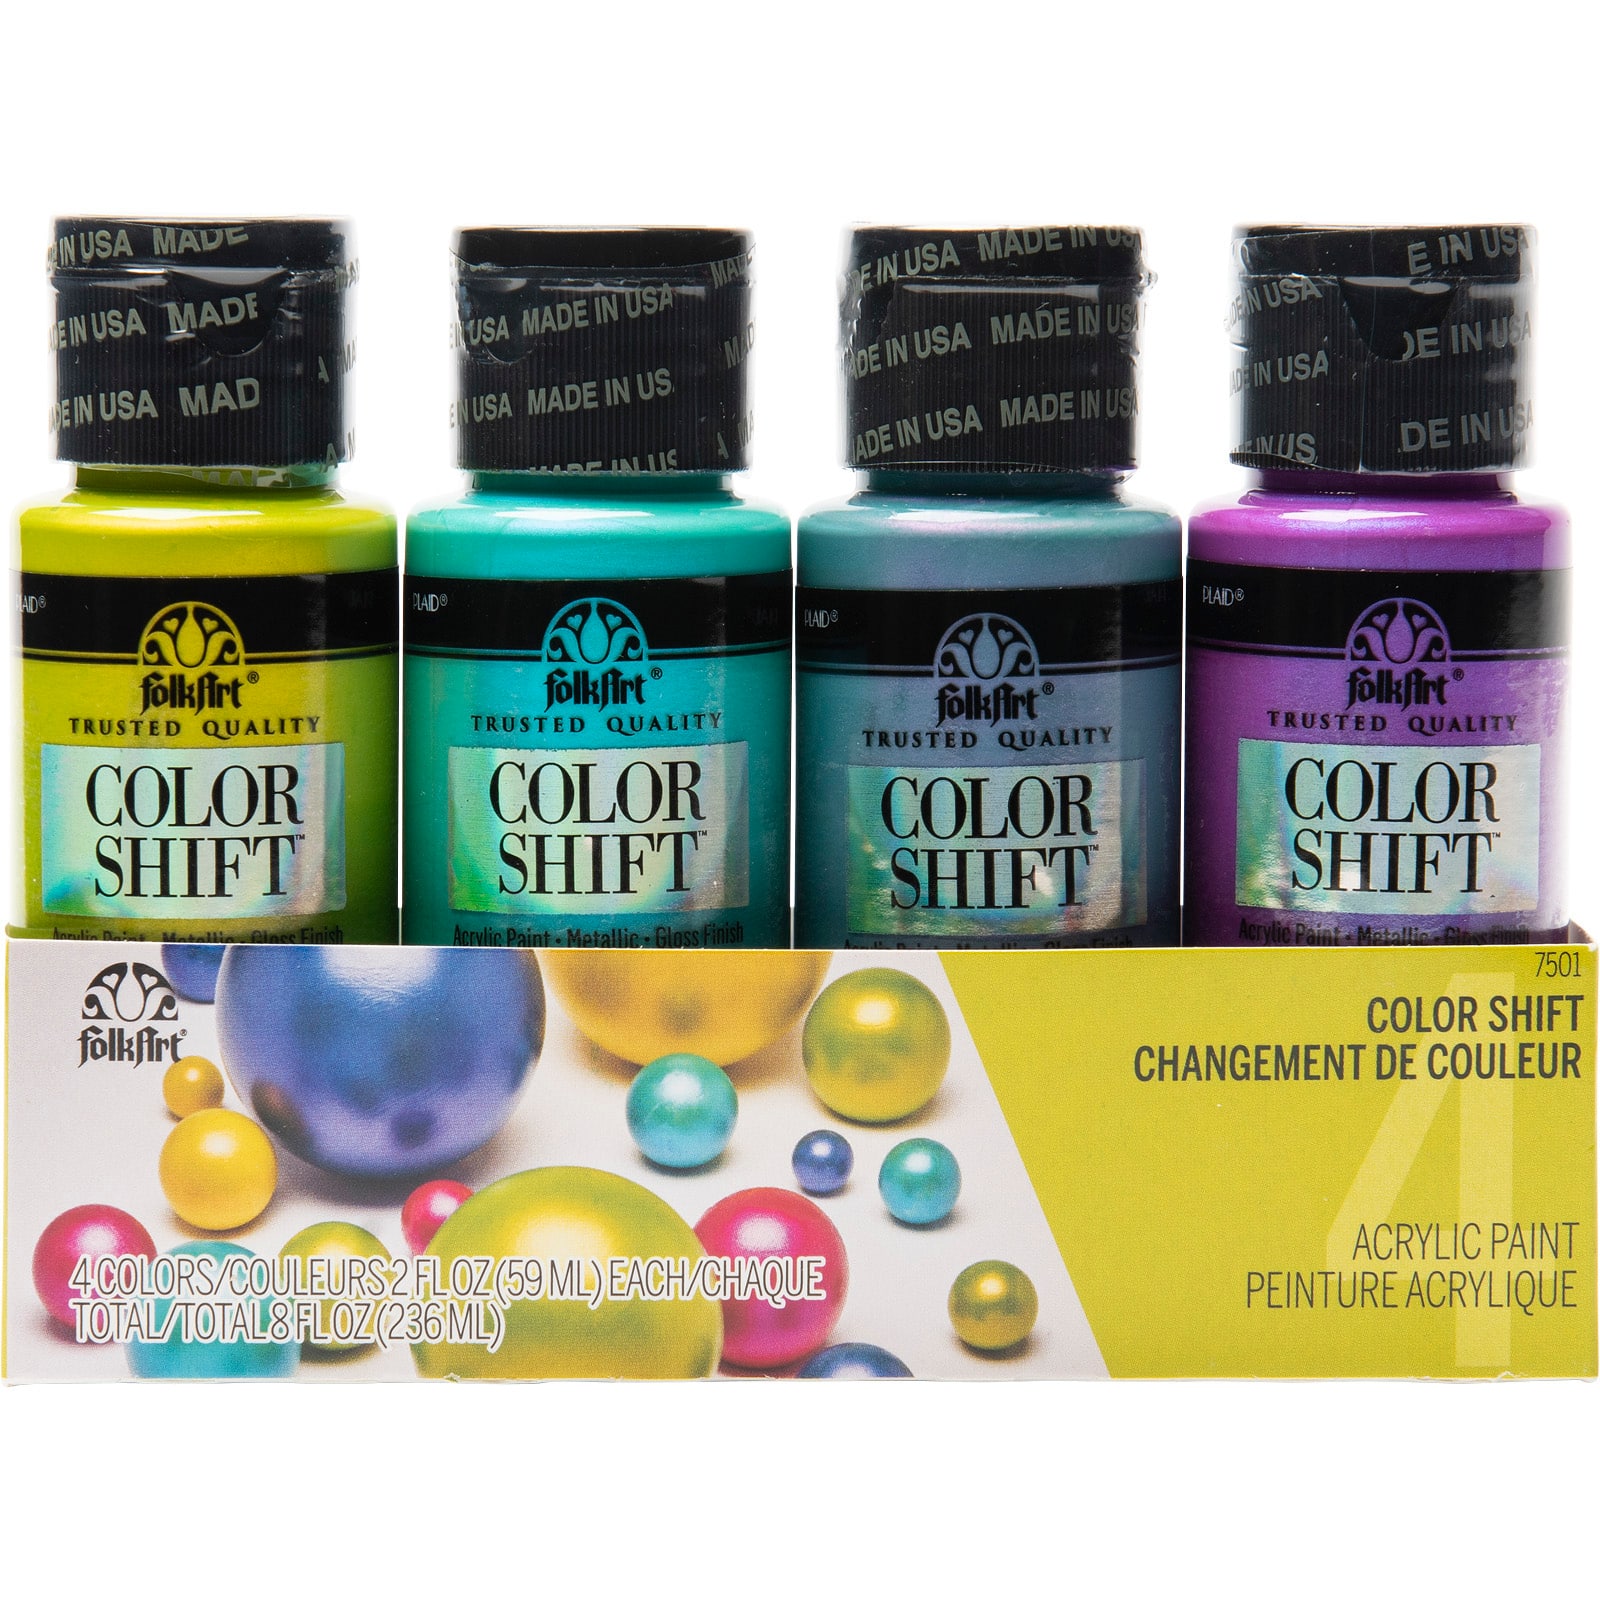 Craft Supply Acrylic Paint Primary Colors Red 72713 Blue 72754 Yellow 72731  Nicole s Craft Studio Craft Paint Set of 3 Multi Small